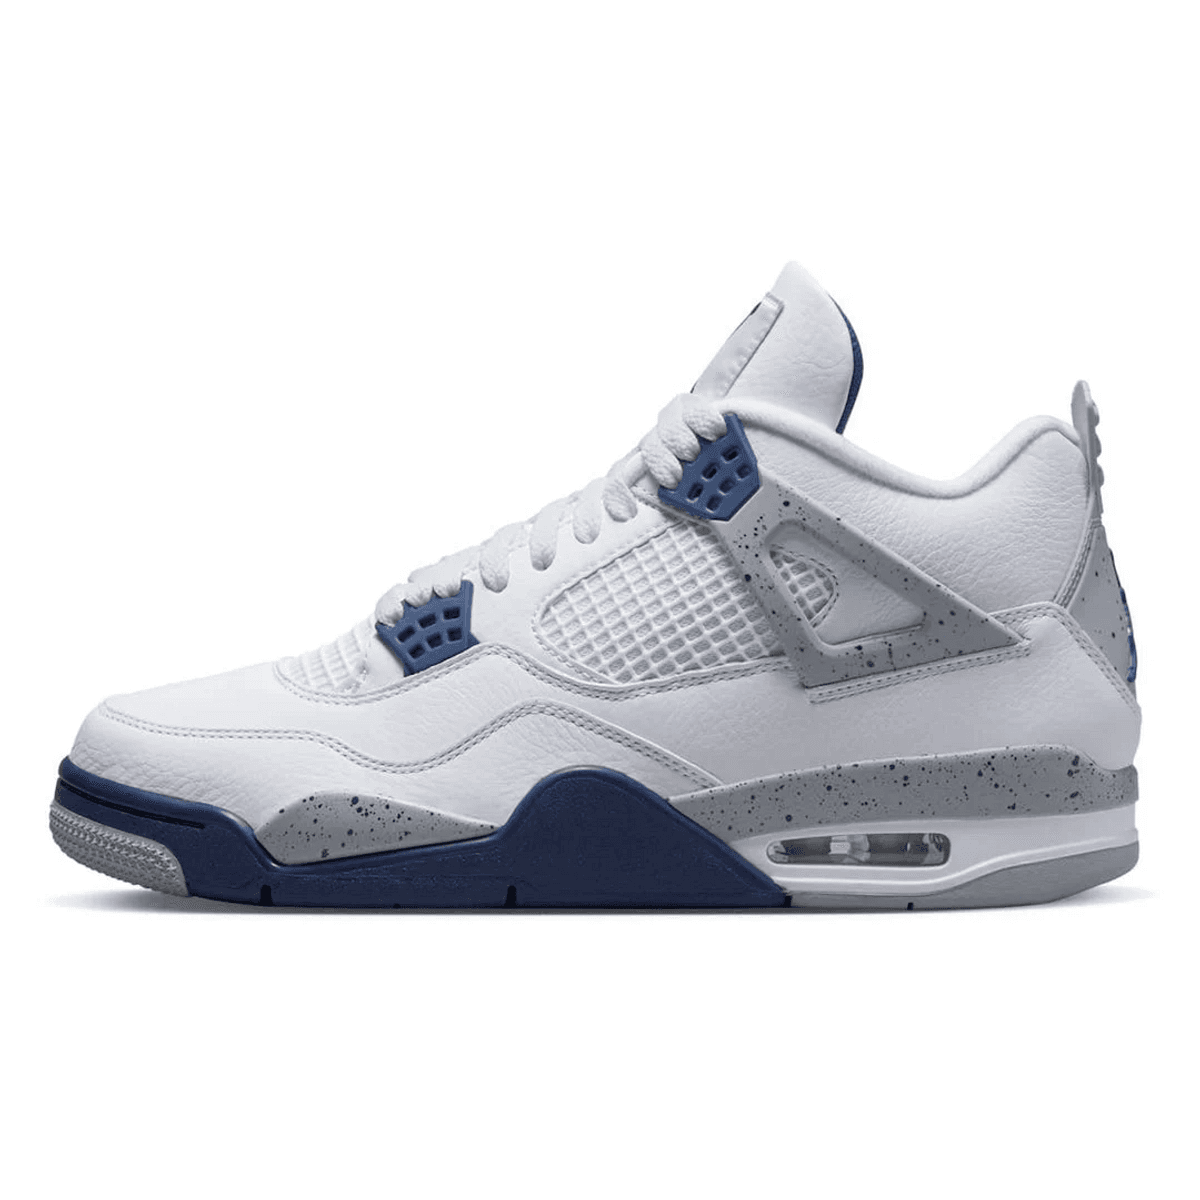 The Air Jordan 4 is Back in a Brand New White Midnight Navy Colorway